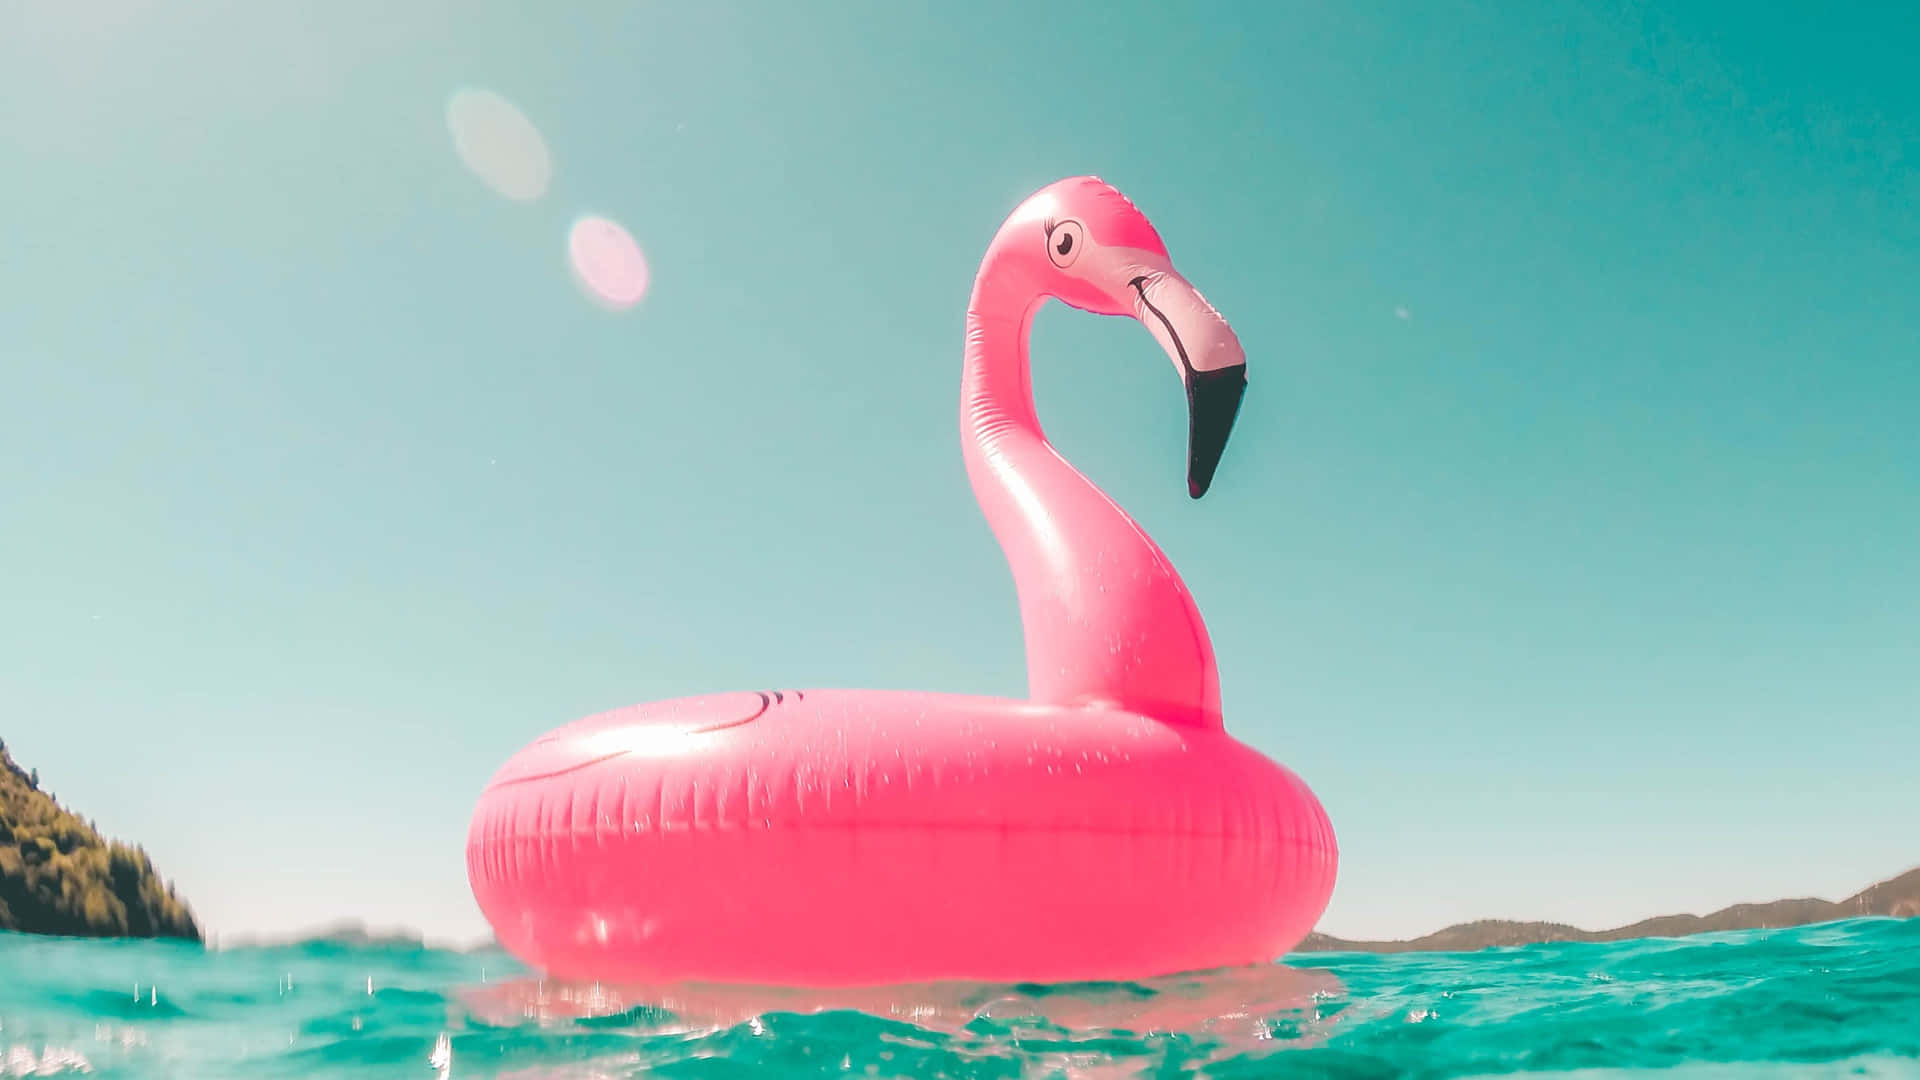 Download Aesthetic Summer Picture Flamingo Pool